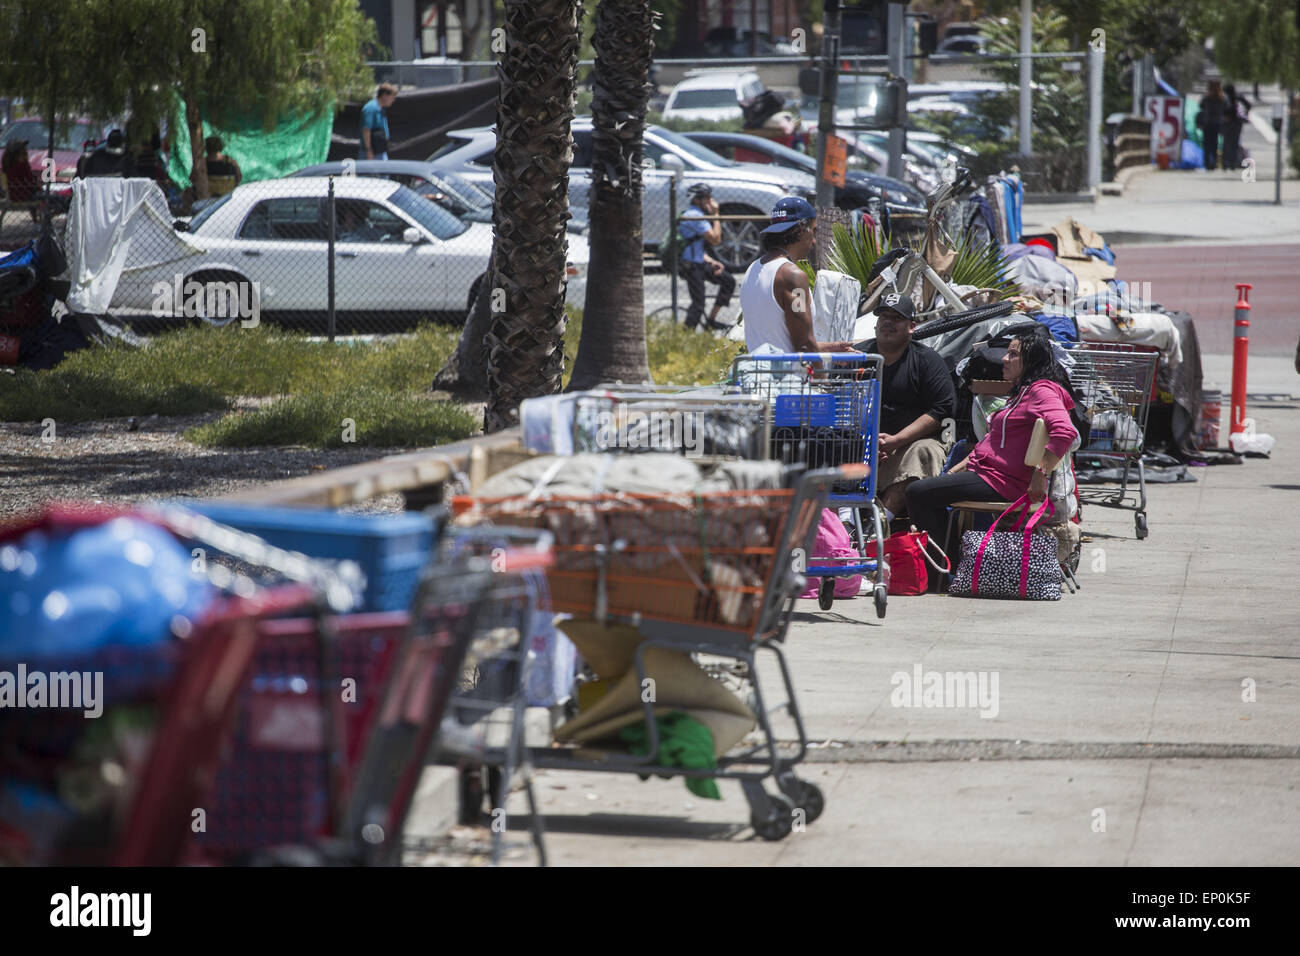 Los Angeles Homeless High Resolution Stock Photography And Images Alamy